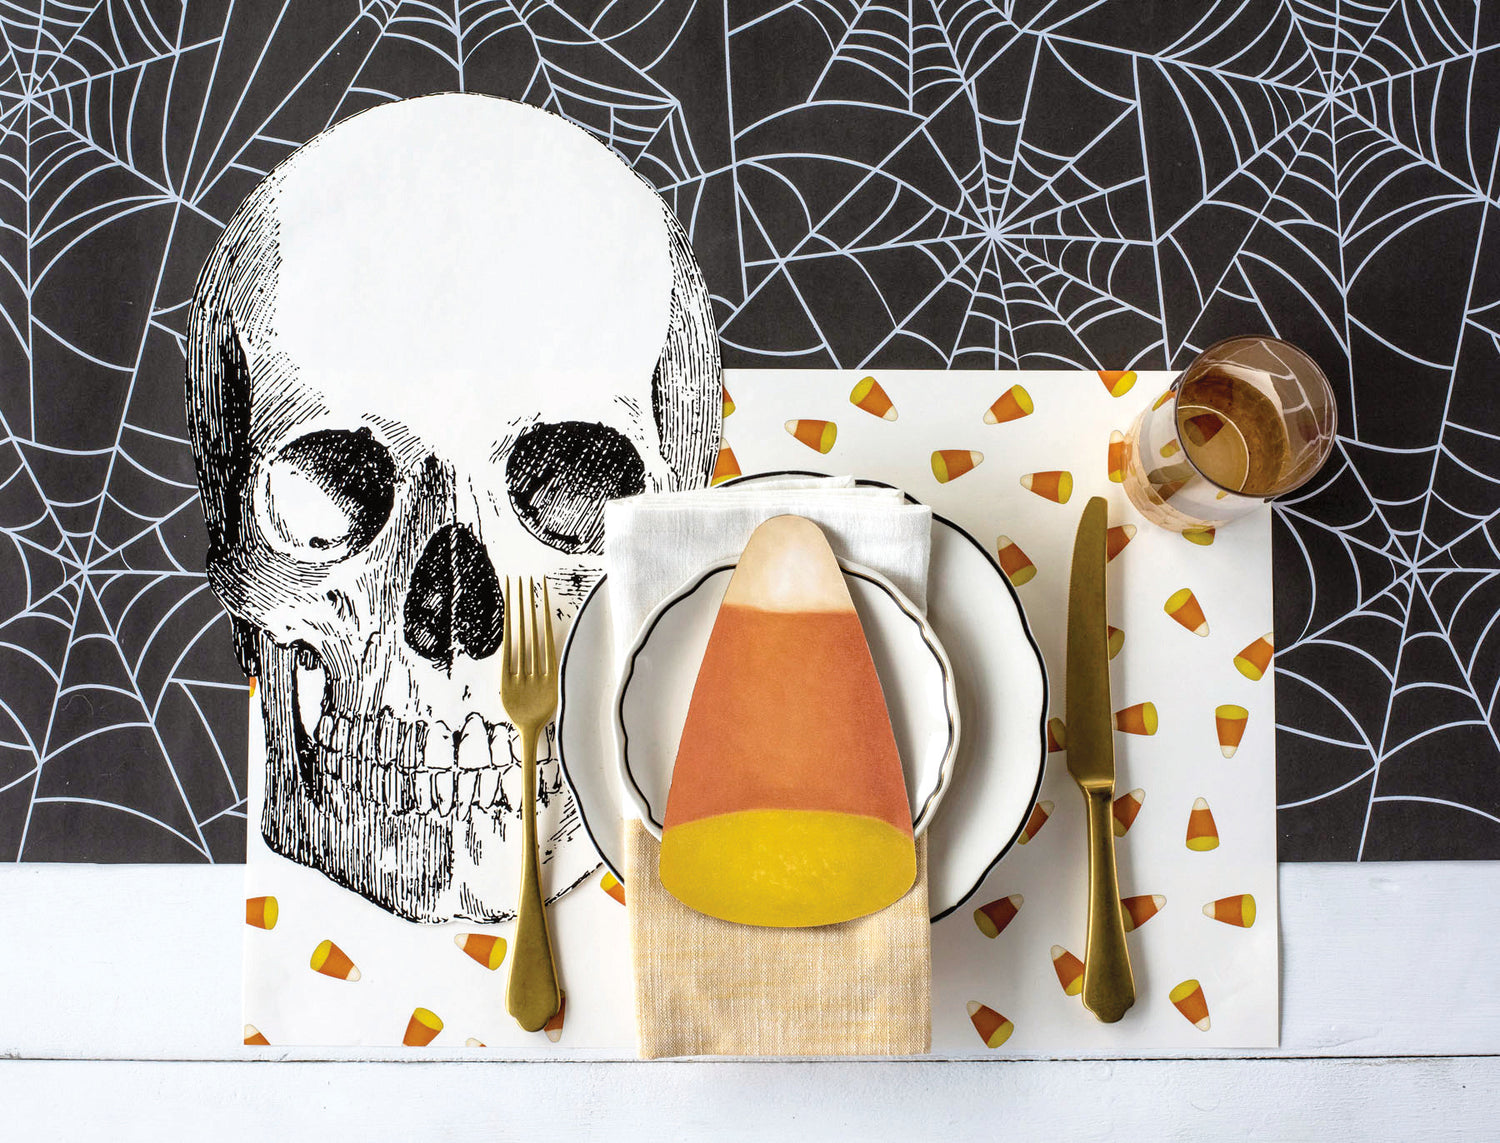 The Spiderweb Runner under a spooky Halloween-themed place setting.